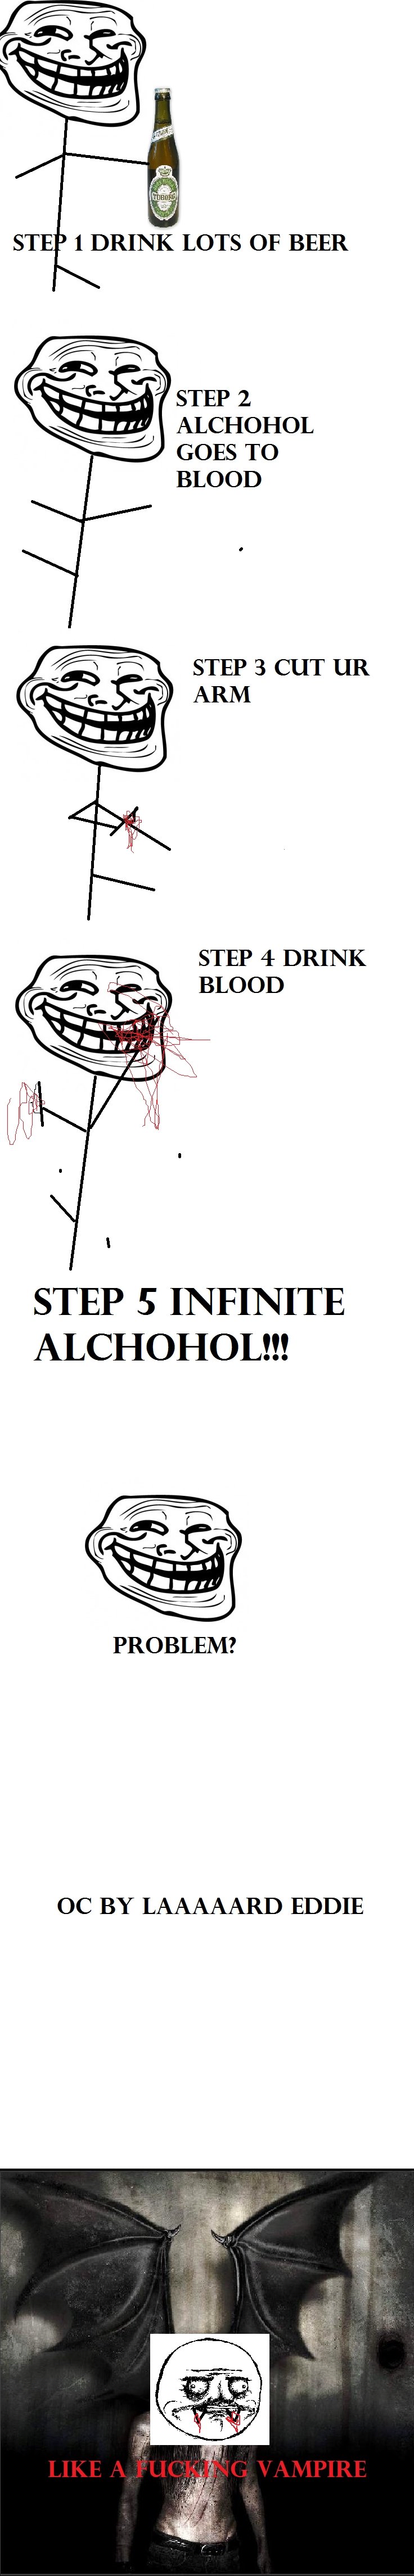 Troll tip: Alchohol. Sorry if my spelling is wrong. STEP 2 ALCHOHOL GOES TO BLOOD STEP 3 CUT UR ARM STEP 4 DRINK BLOOD STEP s INFINITE ALCHOHOL!!! PROBLEM? BY E